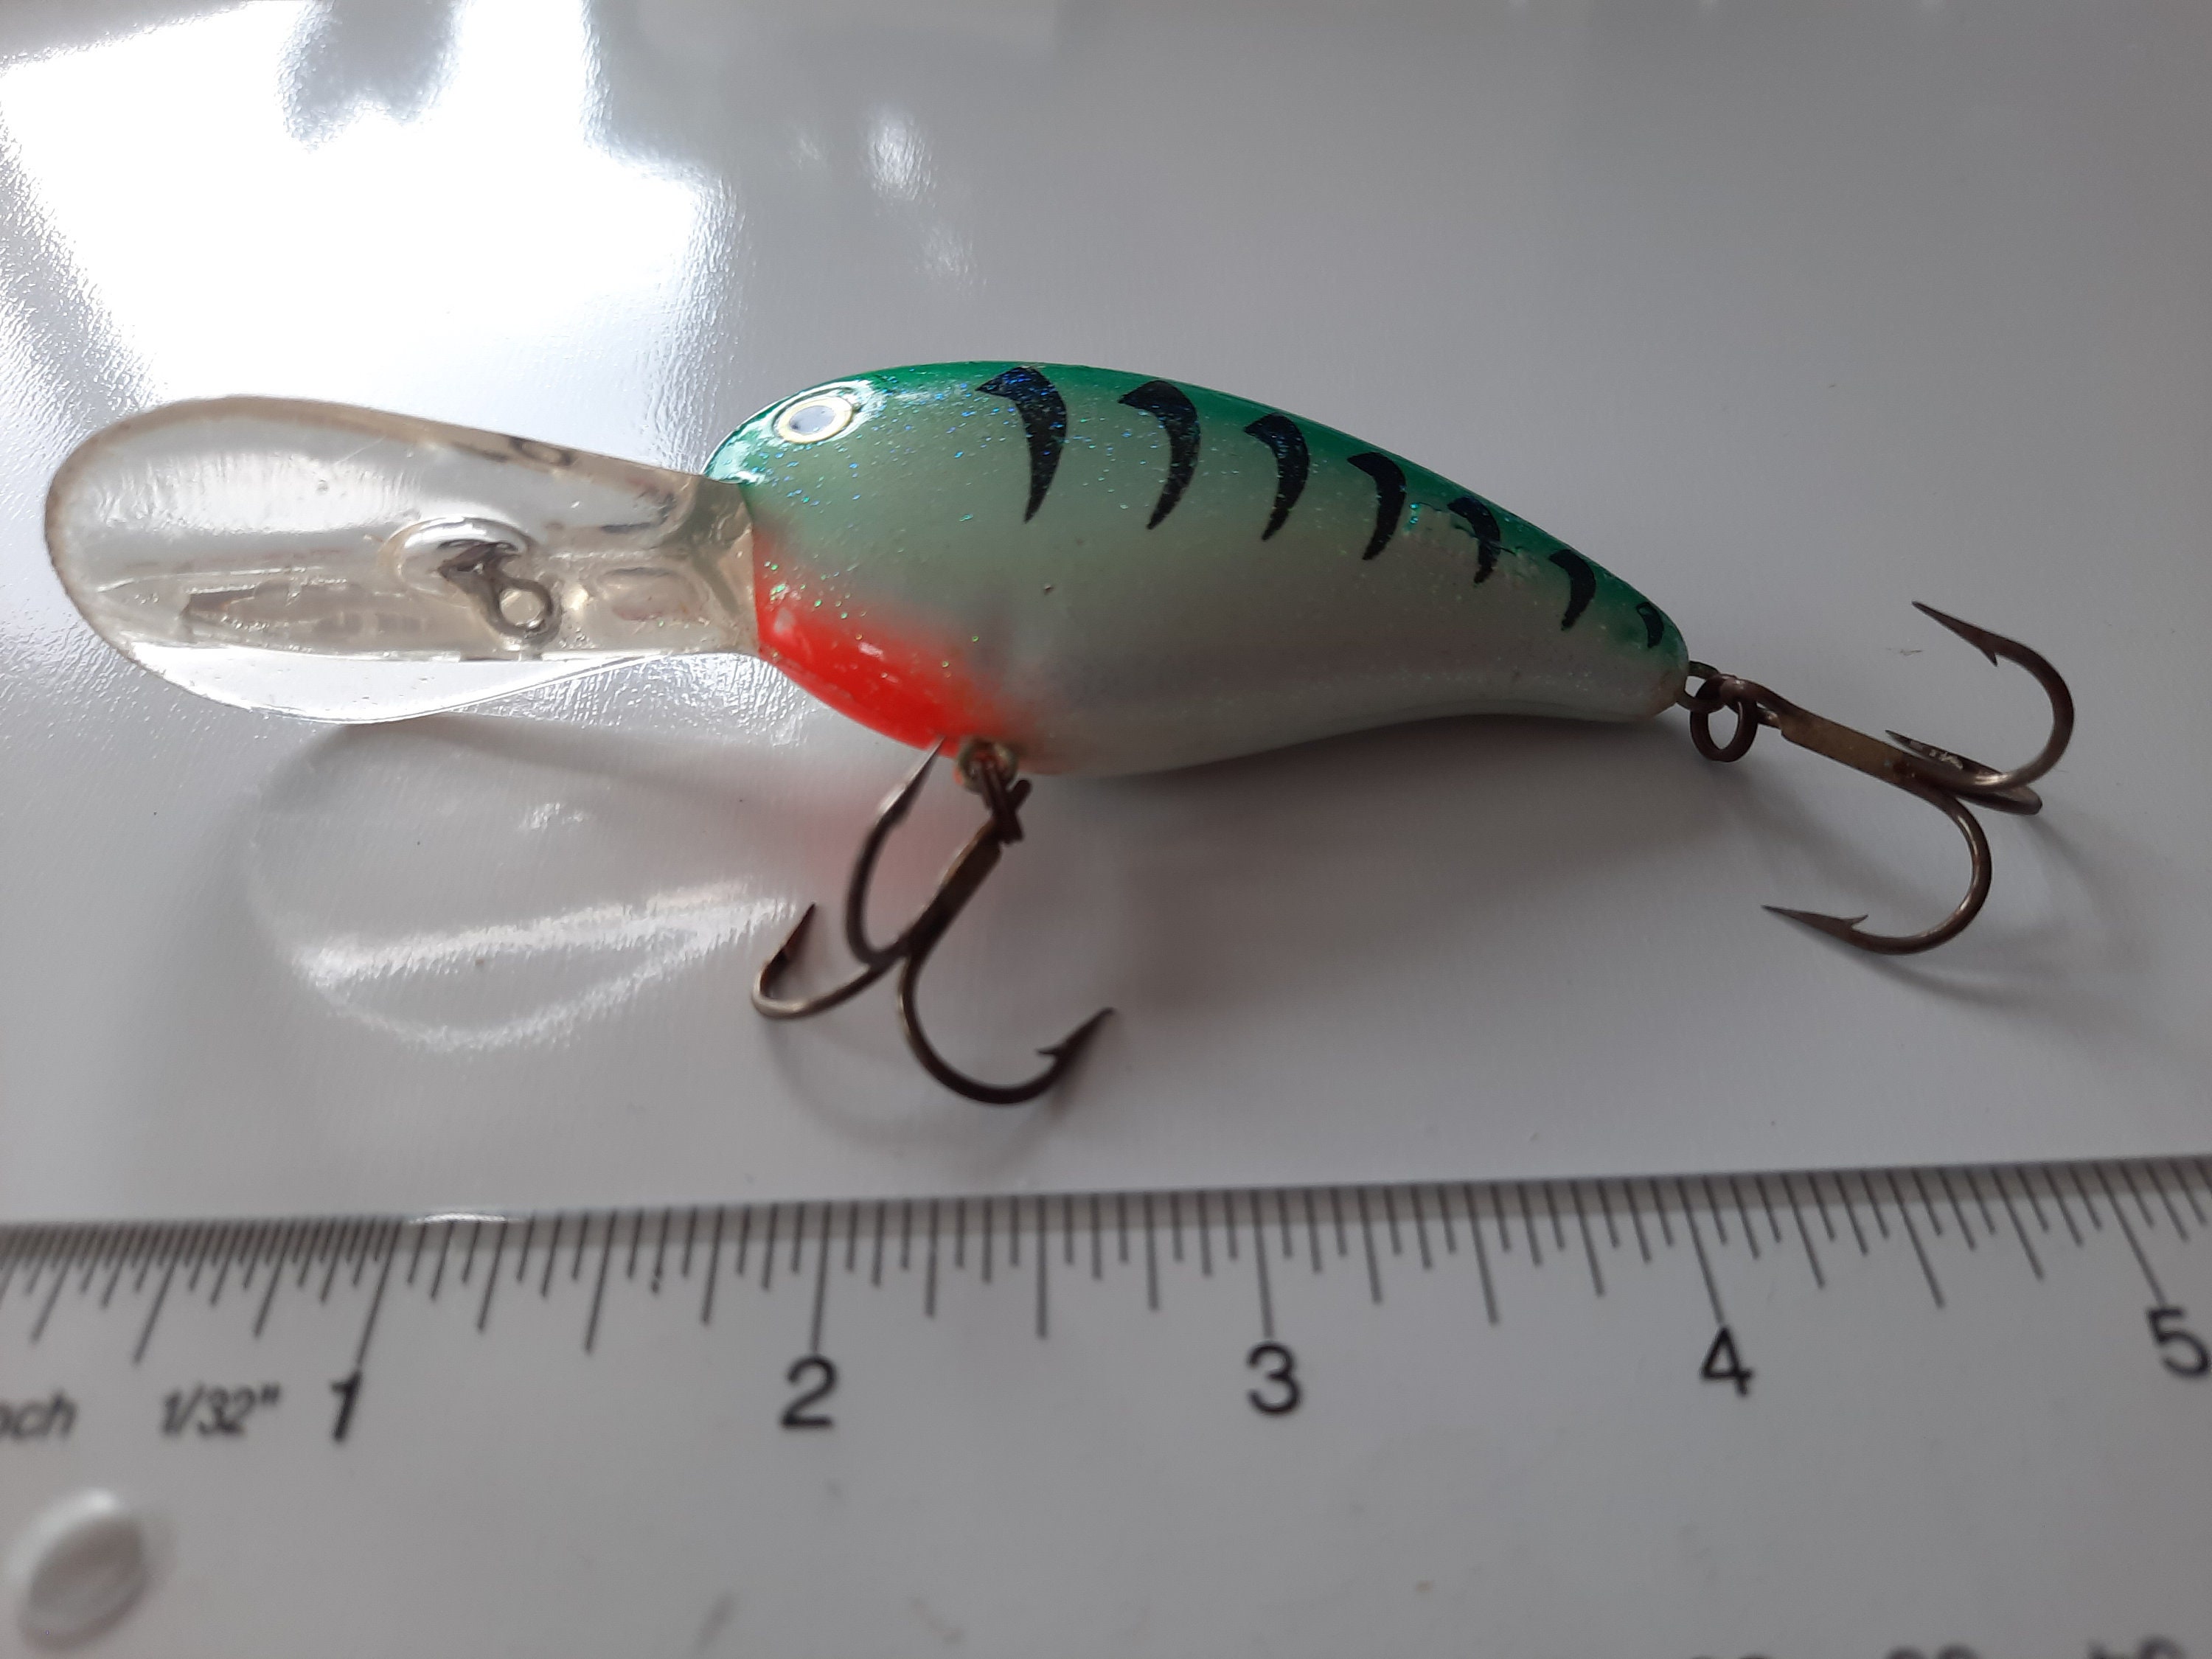 Vintage 1980s Fishing Lure: Mann's Deep Diving Loudmouth Rattling  Crankbait, Crystal Green Sunfish, 4.5, 7/8 Oz., Moderately Fished 